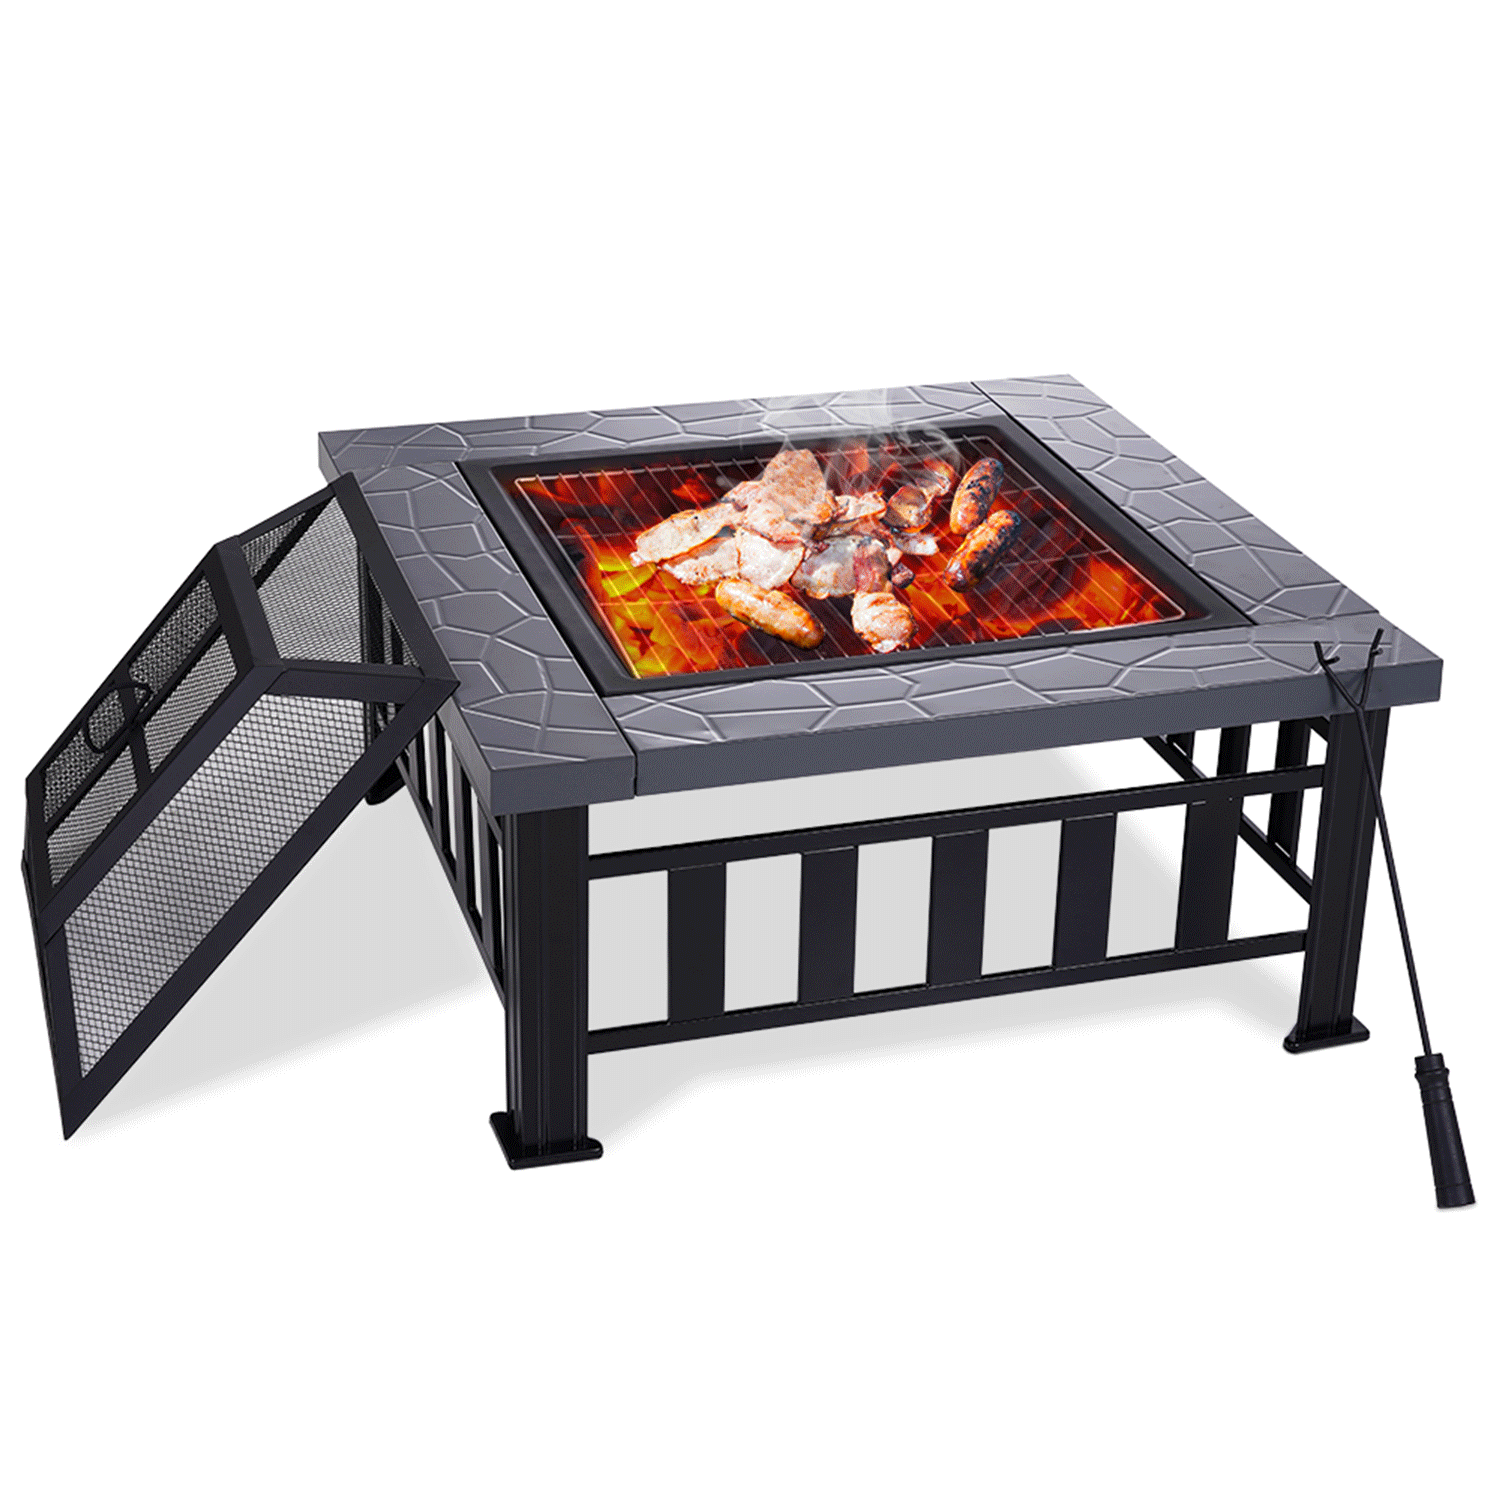 Outdoor Wood Burning Fire Pit  Garden Patio BBQ Grill Square Stove W/ Cover 